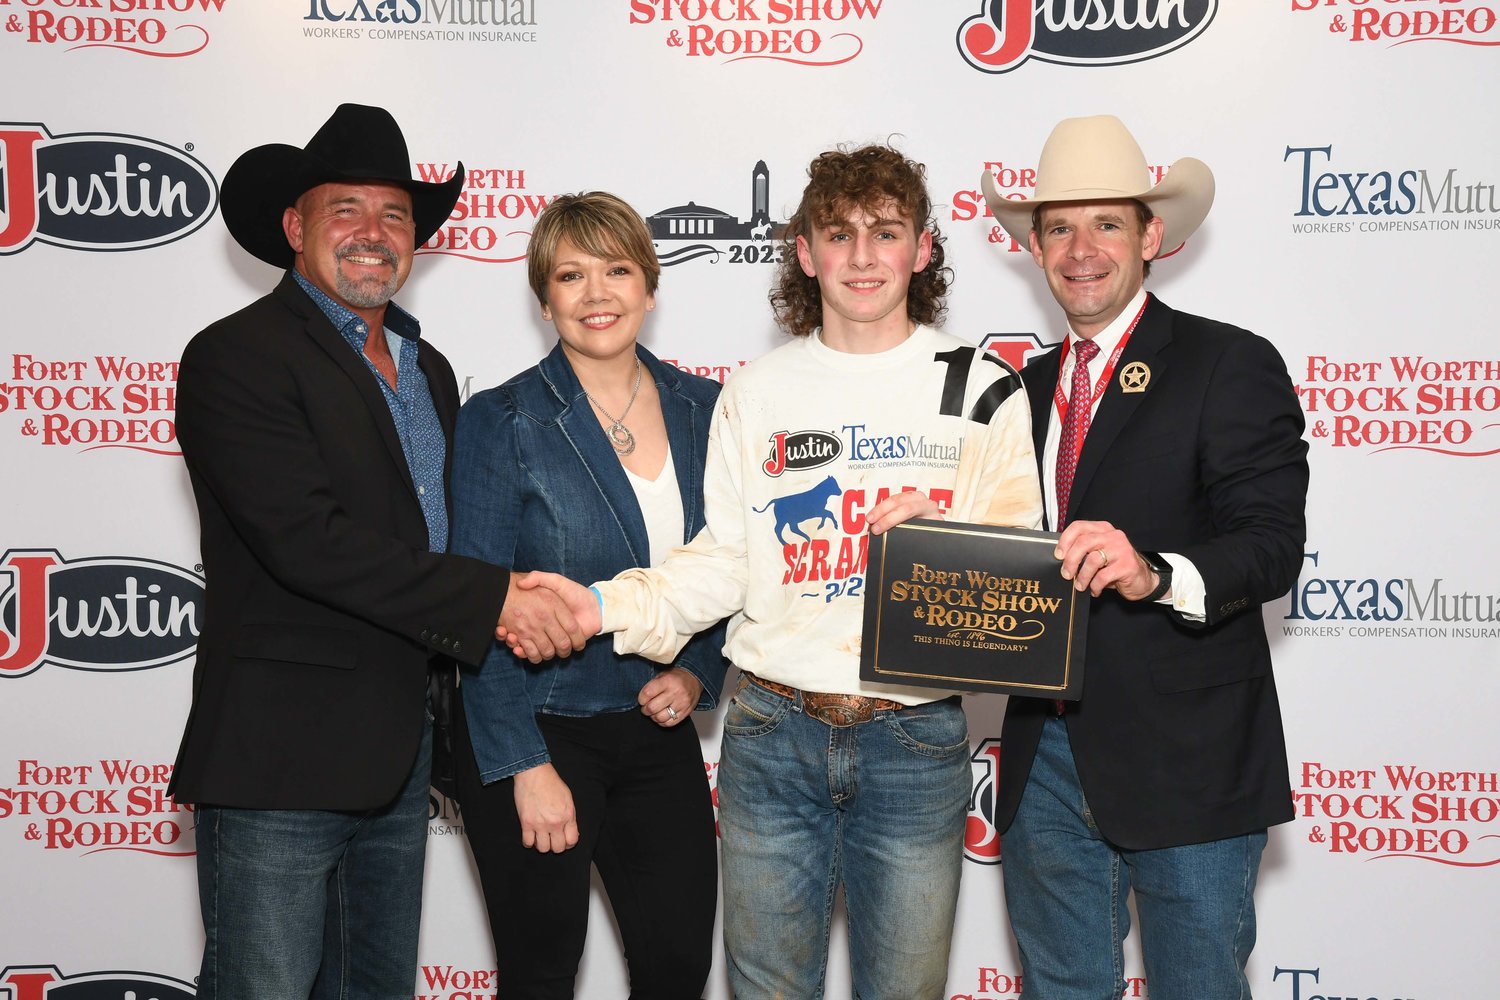 Daniel Kernes of Quitman FFA won a $500 purchase certificate in the Fort Worth Stock Show & Rodeo calf scramble Jan. 28 toward a beef or dairy heifer for a 4-H or FFA project for exhibition at next year’s show. The certificate, presented by Stock Show Calf Scramble Committee member Paxton Motheral, was sponsored by Angry Antler Ranch, represented by Ross and Mary Dionisi. Kernes’s parents are Tania and Lynn Kernes of Quitman.